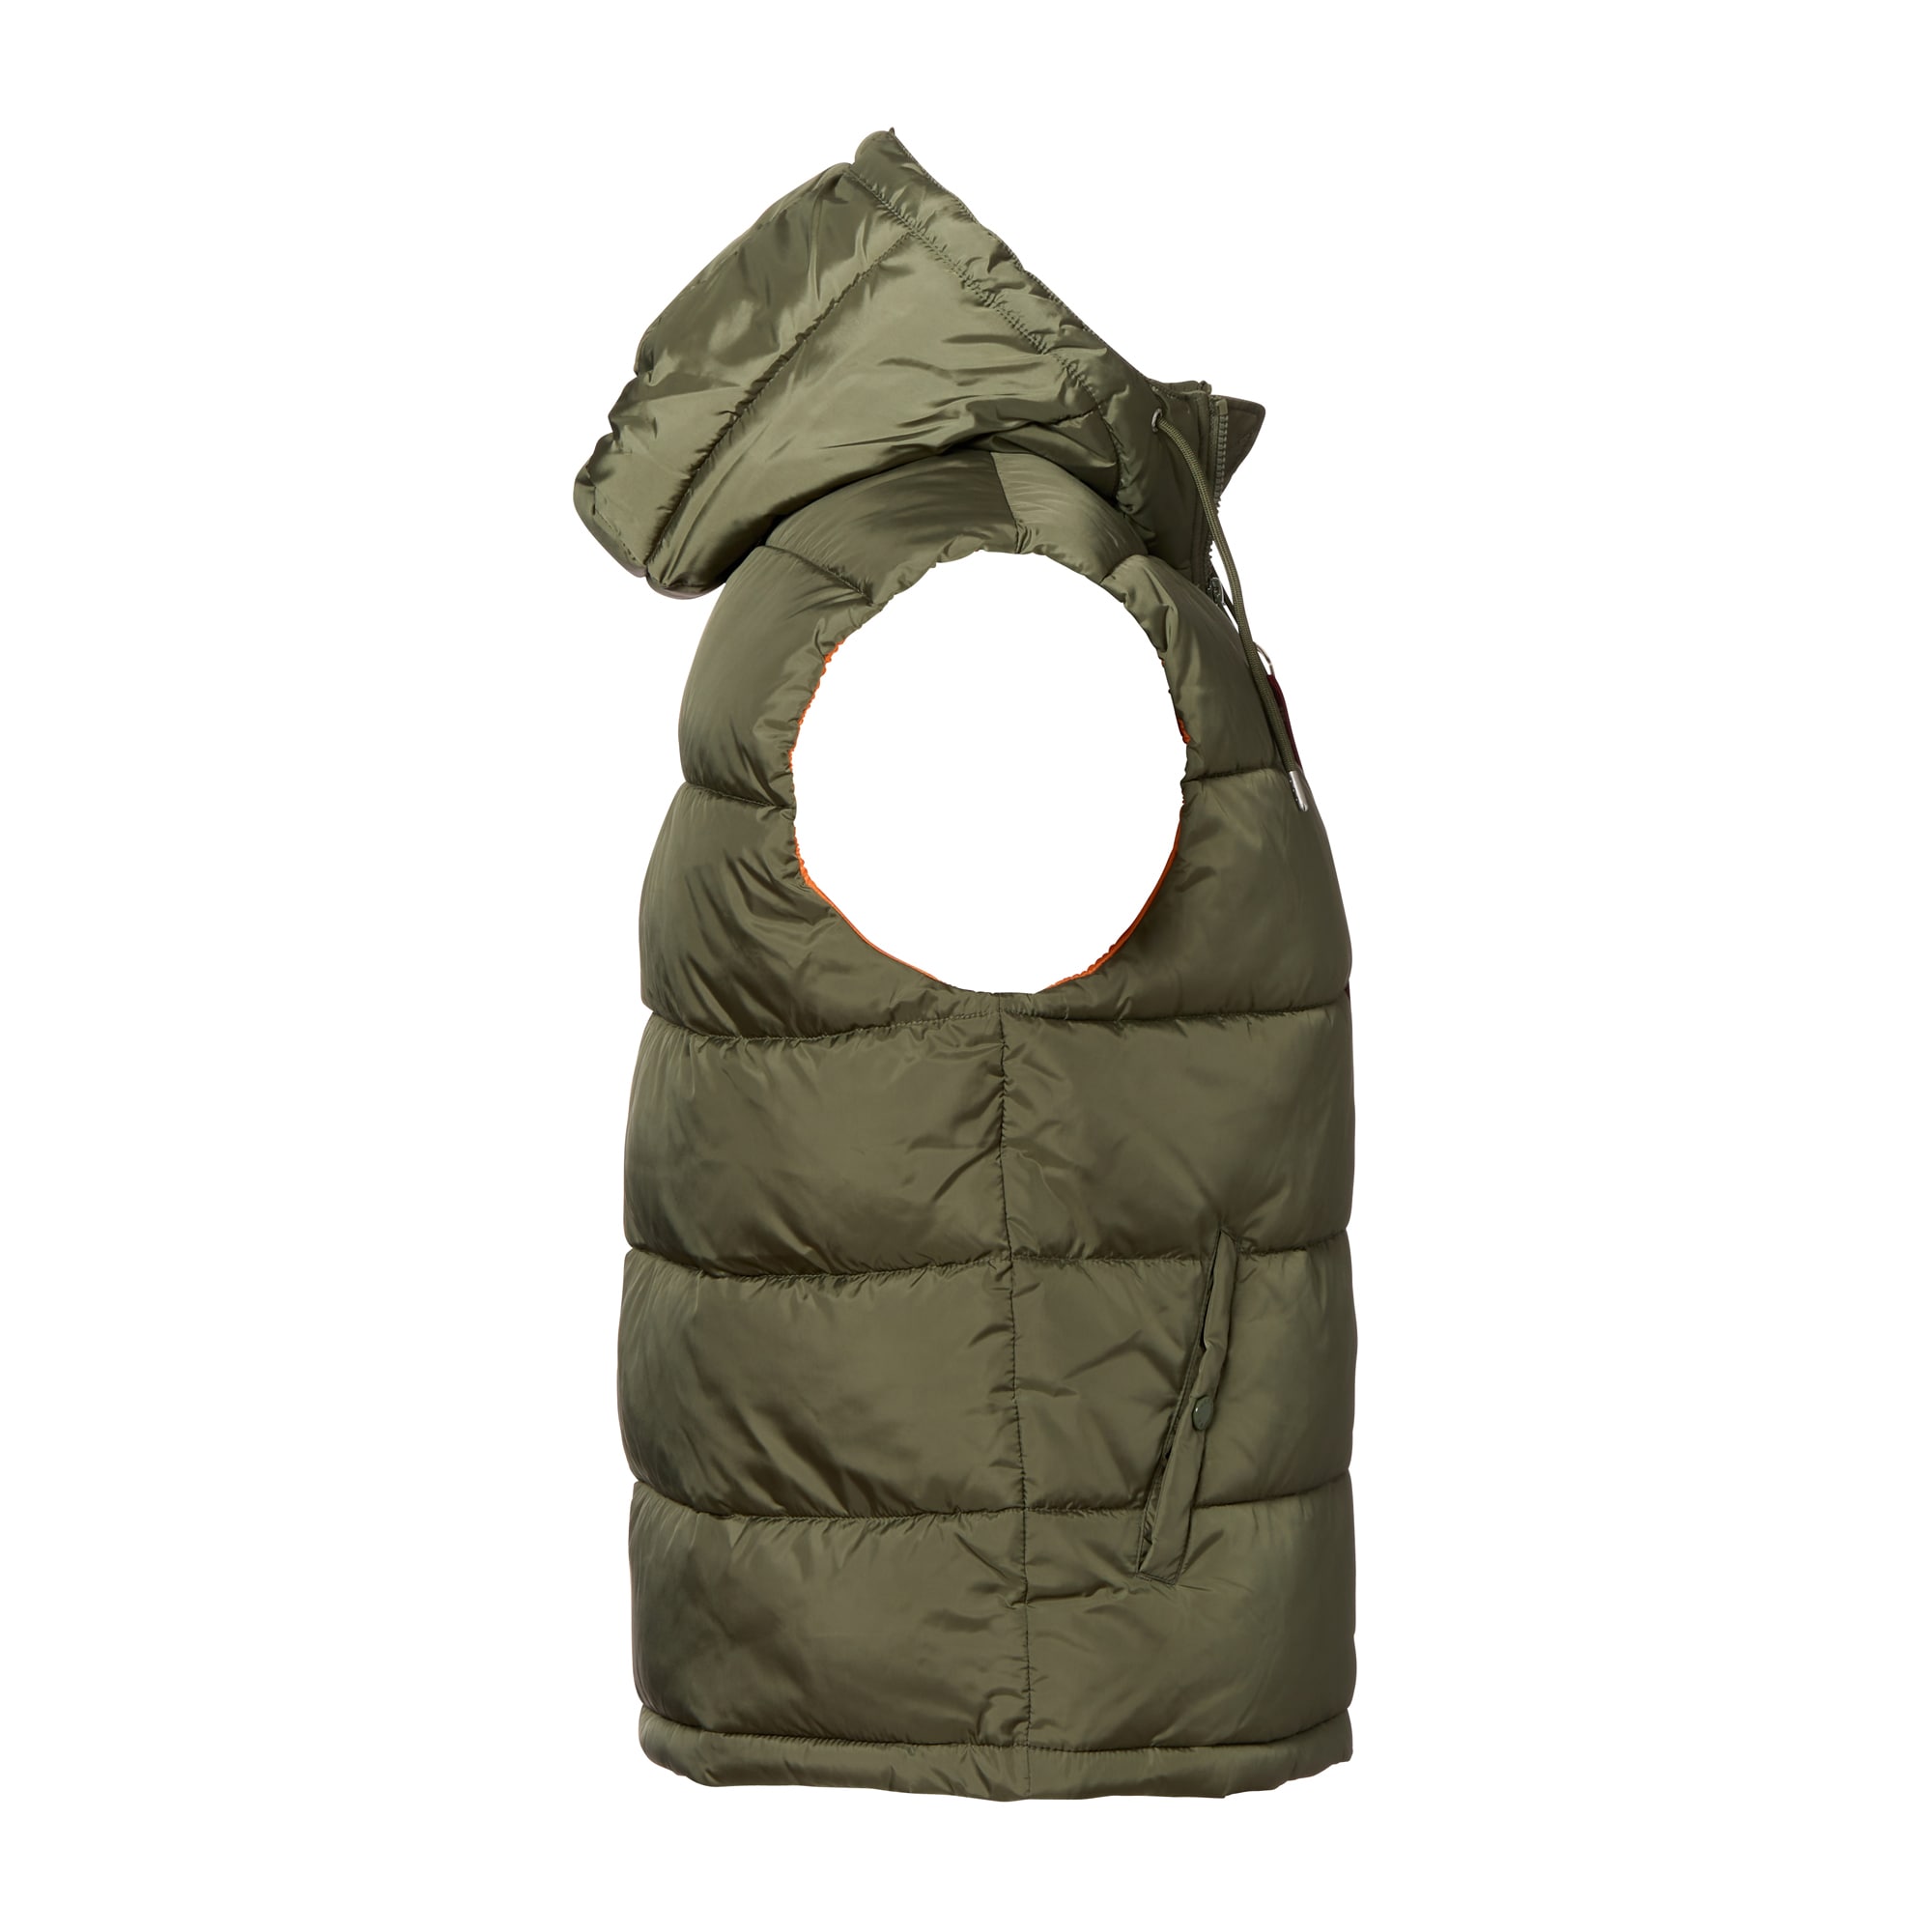 Purchase the Alpha Vest FD green sage Puffer Industries Hooded